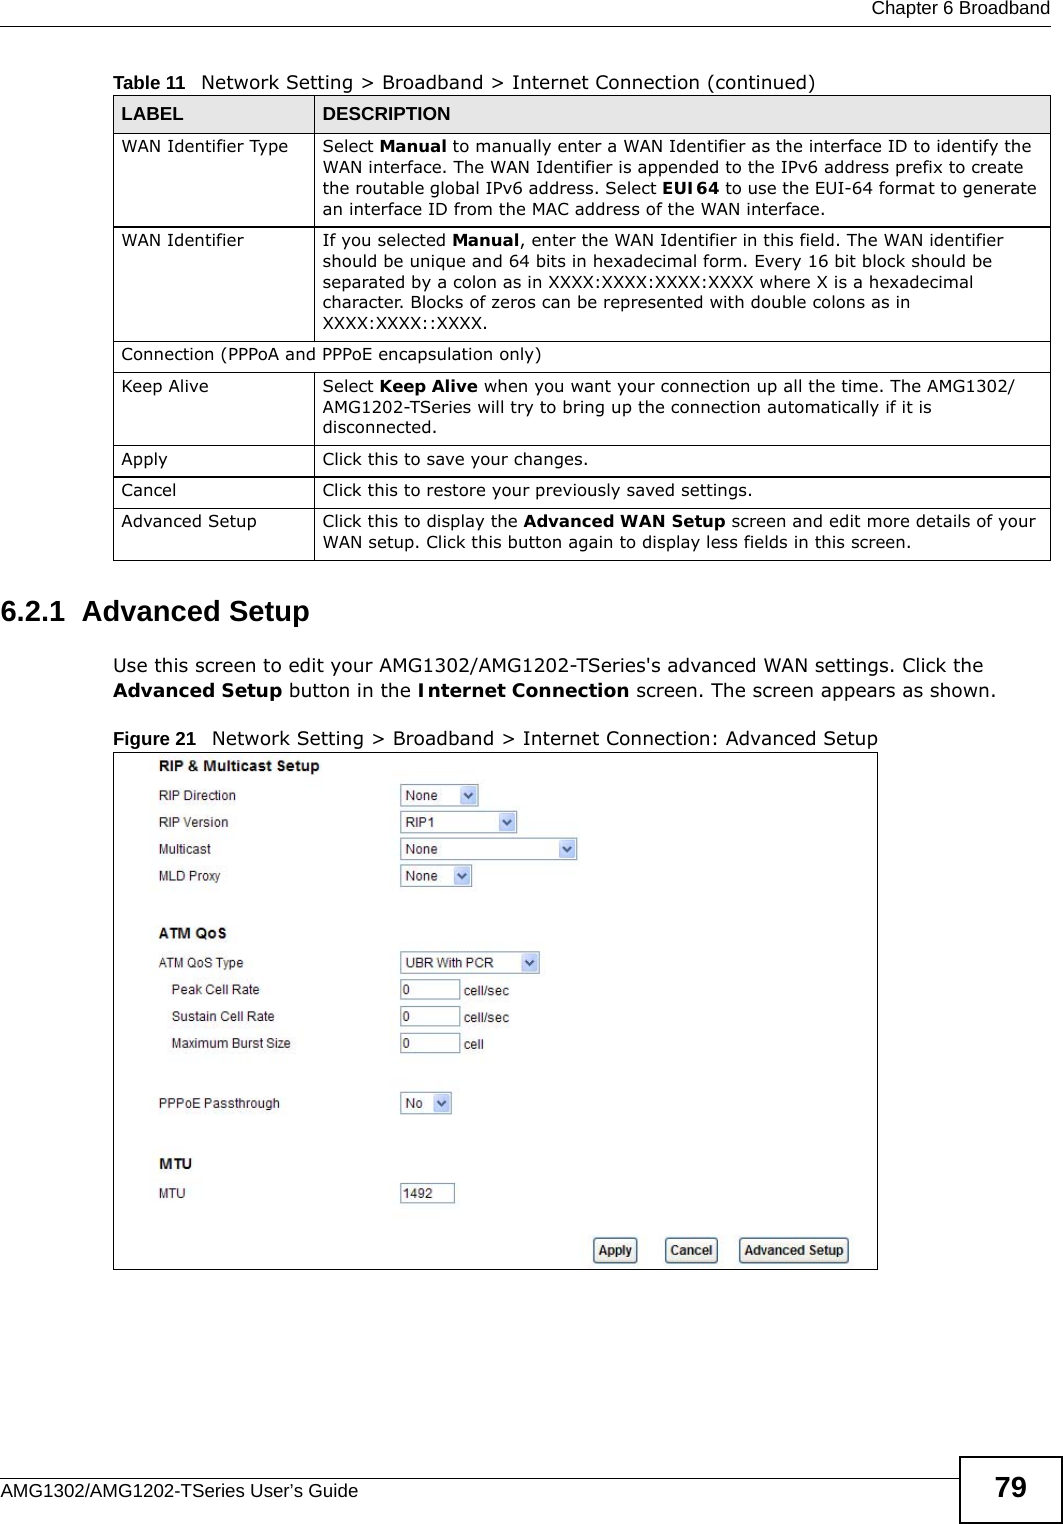  Chapter 6 BroadbandAMG1302/AMG1202-TSeries User’s Guide 796.2.1  Advanced Setup Use this screen to edit your AMG1302/AMG1202-TSeries&apos;s advanced WAN settings. Click the Advanced Setup button in the Internet Connection screen. The screen appears as shown.Figure 21   Network Setting &gt; Broadband &gt; Internet Connection: Advanced SetupWAN Identifier Type Select Manual to manually enter a WAN Identifier as the interface ID to identify the WAN interface. The WAN Identifier is appended to the IPv6 address prefix to create the routable global IPv6 address. Select EUI64 to use the EUI-64 format to generate an interface ID from the MAC address of the WAN interface.WAN Identifier If you selected Manual, enter the WAN Identifier in this field. The WAN identifier should be unique and 64 bits in hexadecimal form. Every 16 bit block should be separated by a colon as in XXXX:XXXX:XXXX:XXXX where X is a hexadecimal character. Blocks of zeros can be represented with double colons as in XXXX:XXXX::XXXX.Connection (PPPoA and PPPoE encapsulation only)Keep Alive Select Keep Alive when you want your connection up all the time. The AMG1302/AMG1202-TSeries will try to bring up the connection automatically if it is disconnected.Apply Click this to save your changes. Cancel Click this to restore your previously saved settings.Advanced Setup Click this to display the Advanced WAN Setup screen and edit more details of your WAN setup. Click this button again to display less fields in this screen.Table 11   Network Setting &gt; Broadband &gt; Internet Connection (continued)LABEL DESCRIPTION